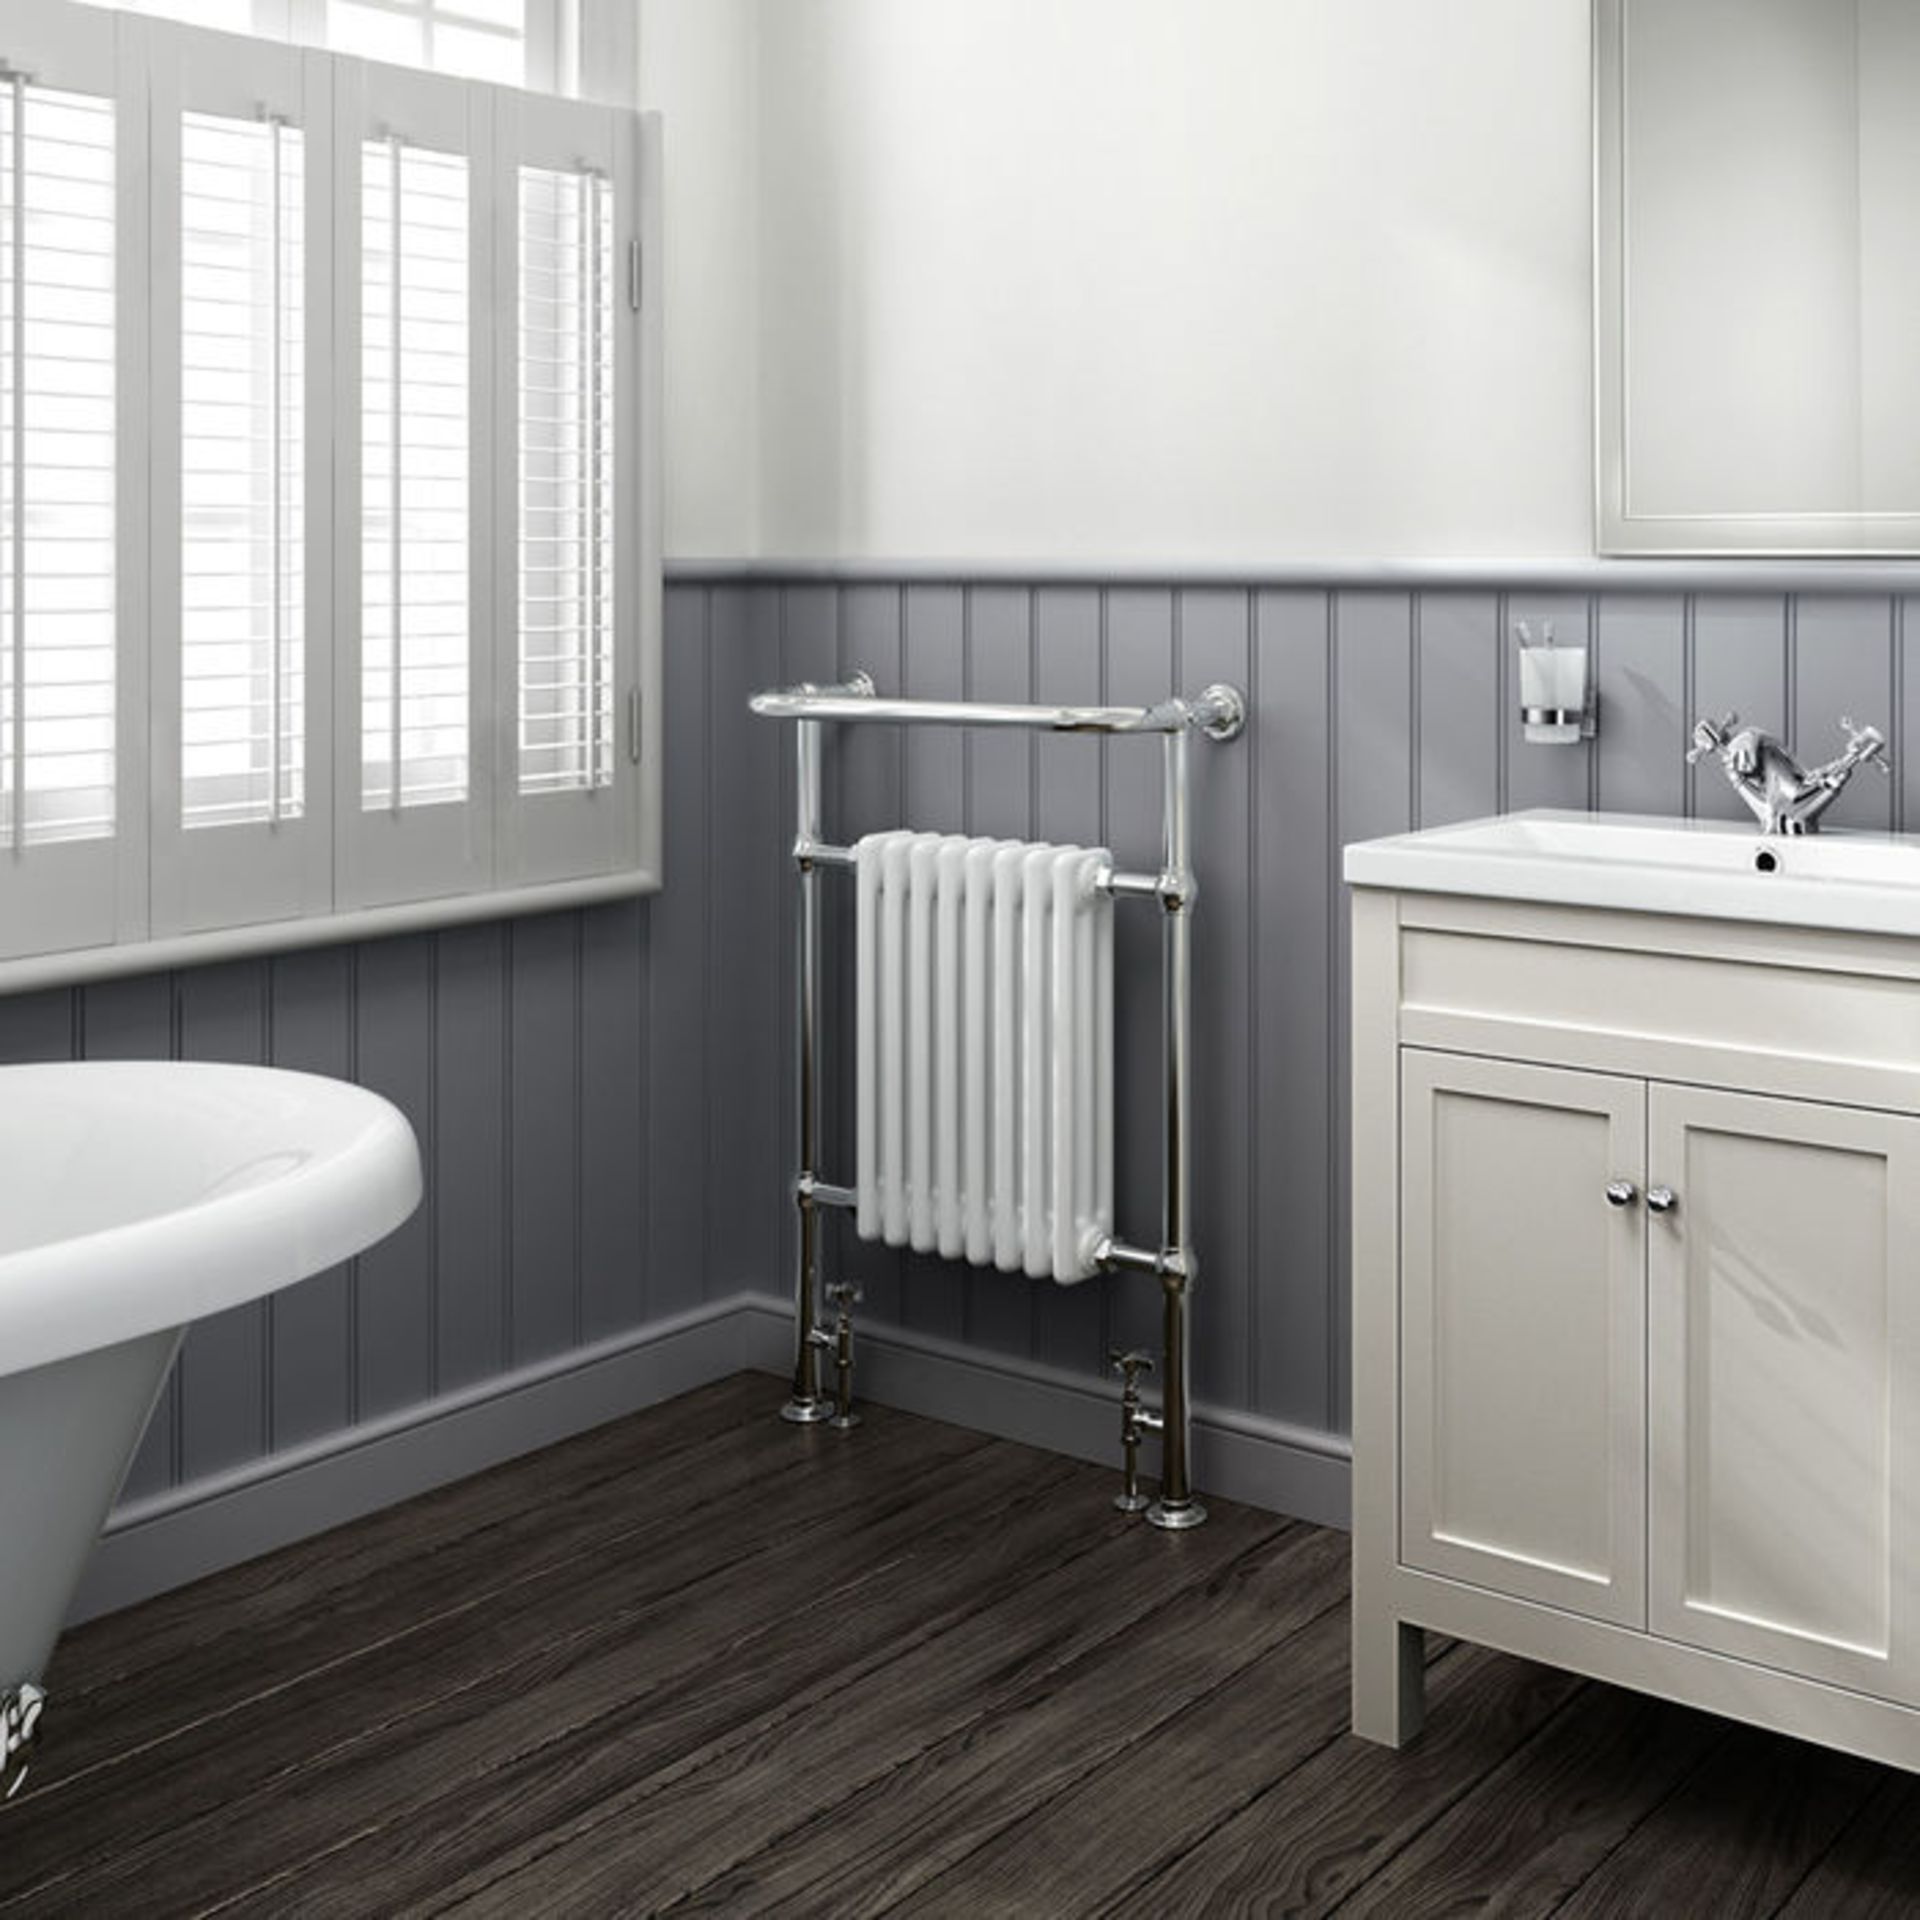 (HM55) 952x659mm Large Traditional White Premium Towel Rail Radiator. We love this because it ... - Image 2 of 3